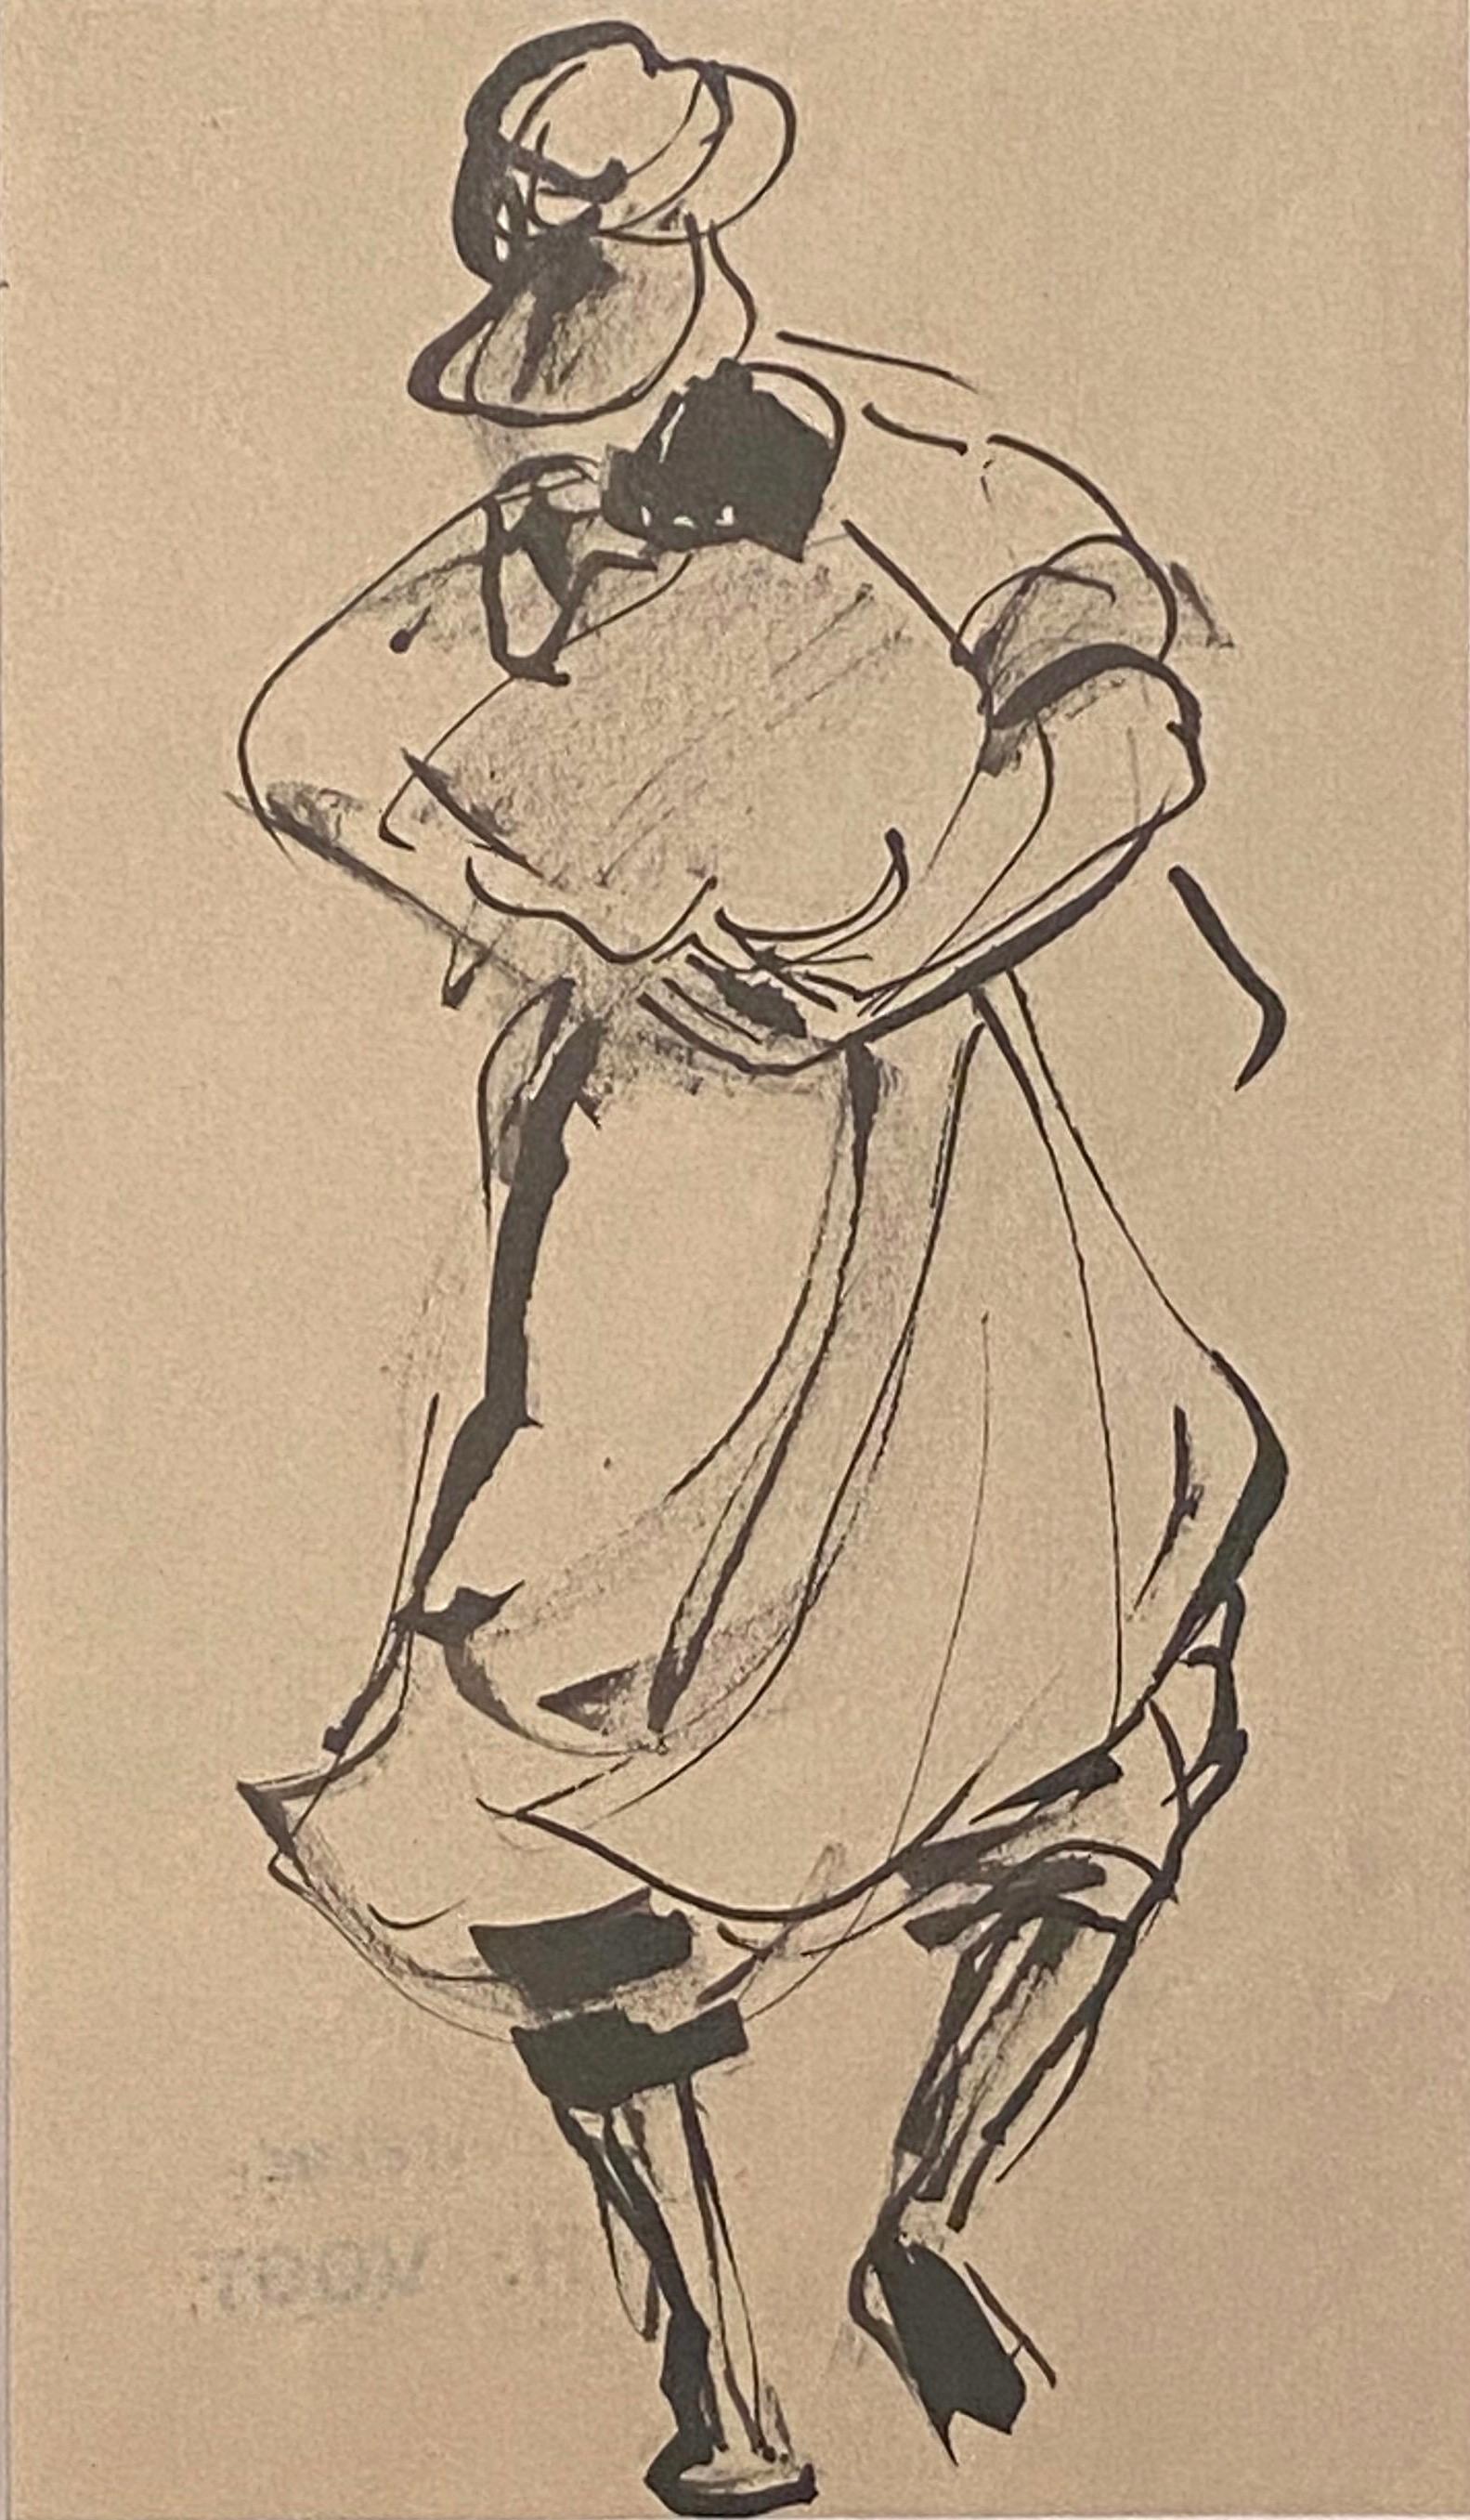 Trip to Marocco is an  artwork realized by Hélène Vogt in the 1950s

Original drawing in pencil and china ink on paper. 

Passepartout included (cm 49 x 34). Perfect conditions.

Very beautiful drawing representing a Moroccan figure depicted during